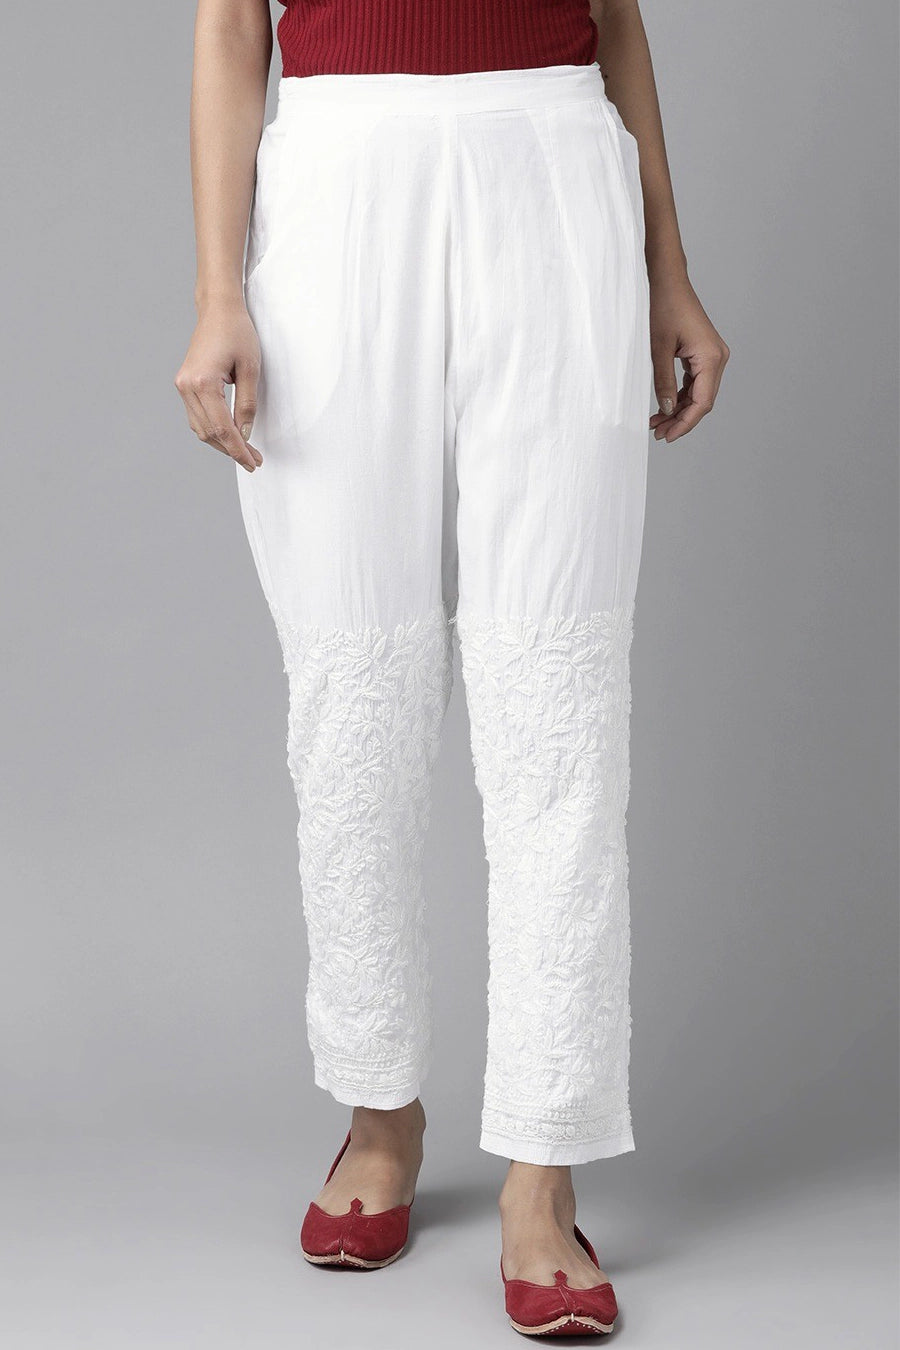 White Cotton Embroidered Pants with Pockets at PinkPhulkari California